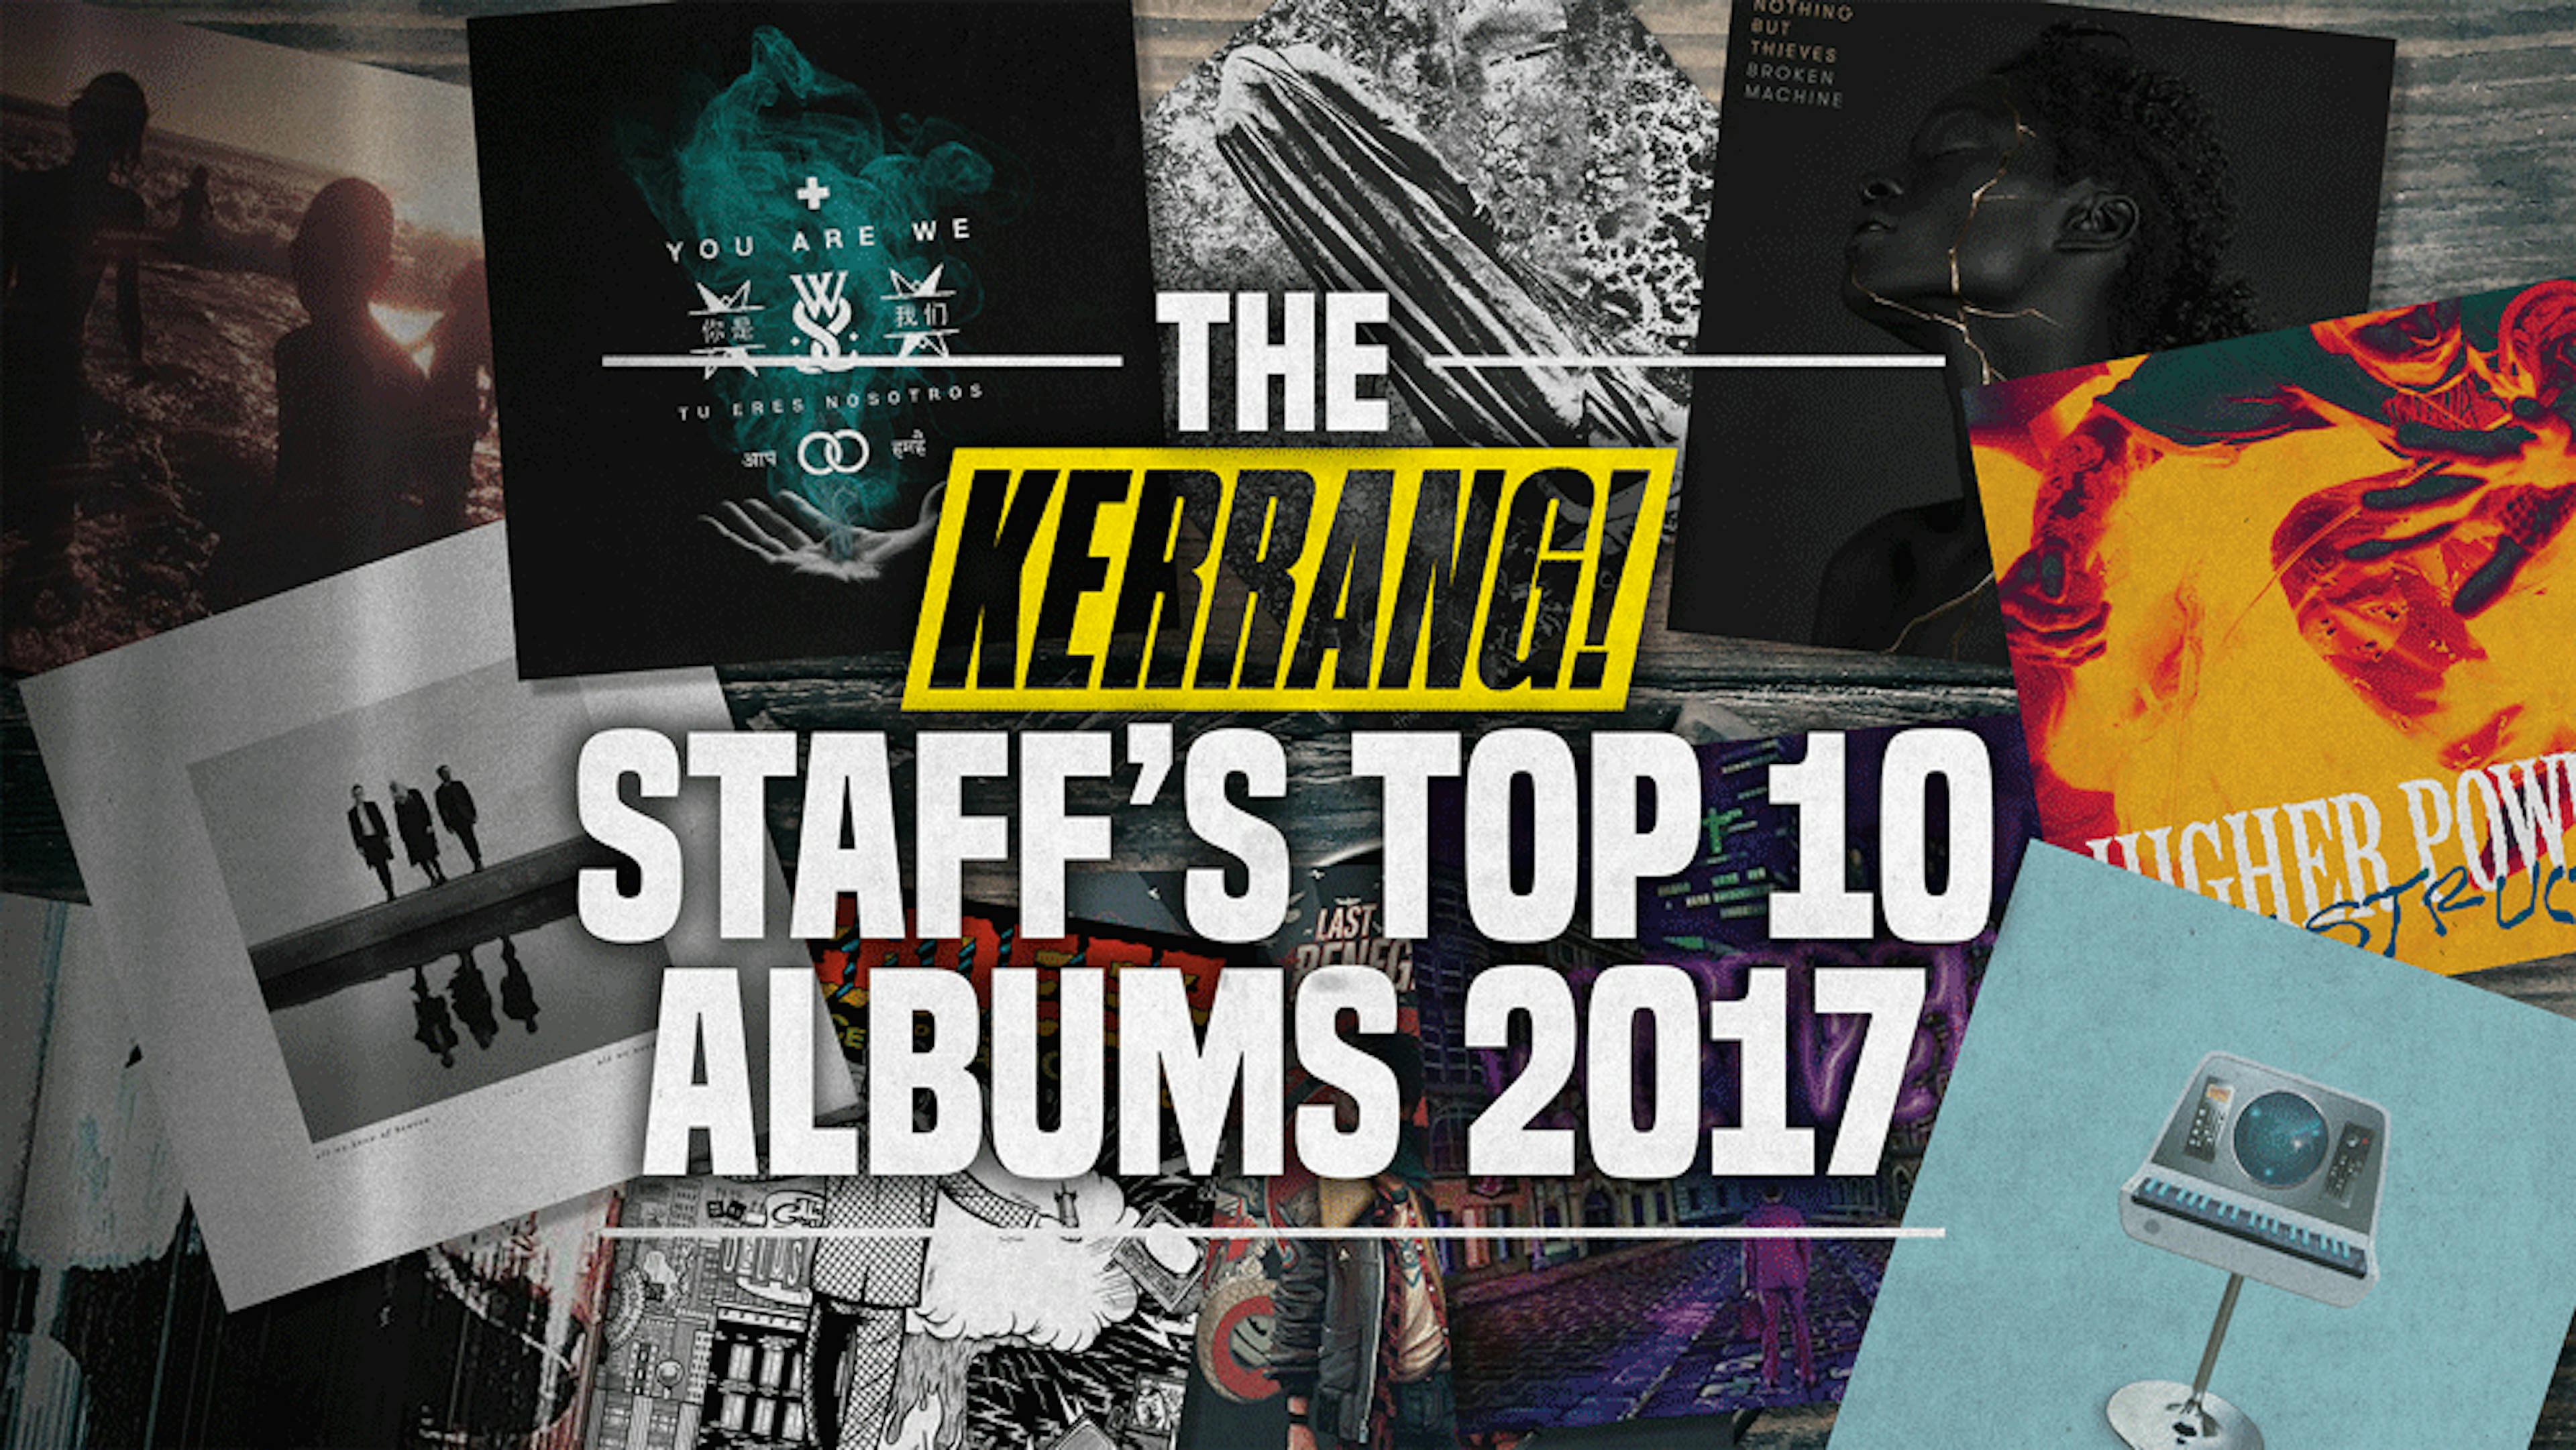 The Kerrang! Staff's Top 10 Albums Of 2017